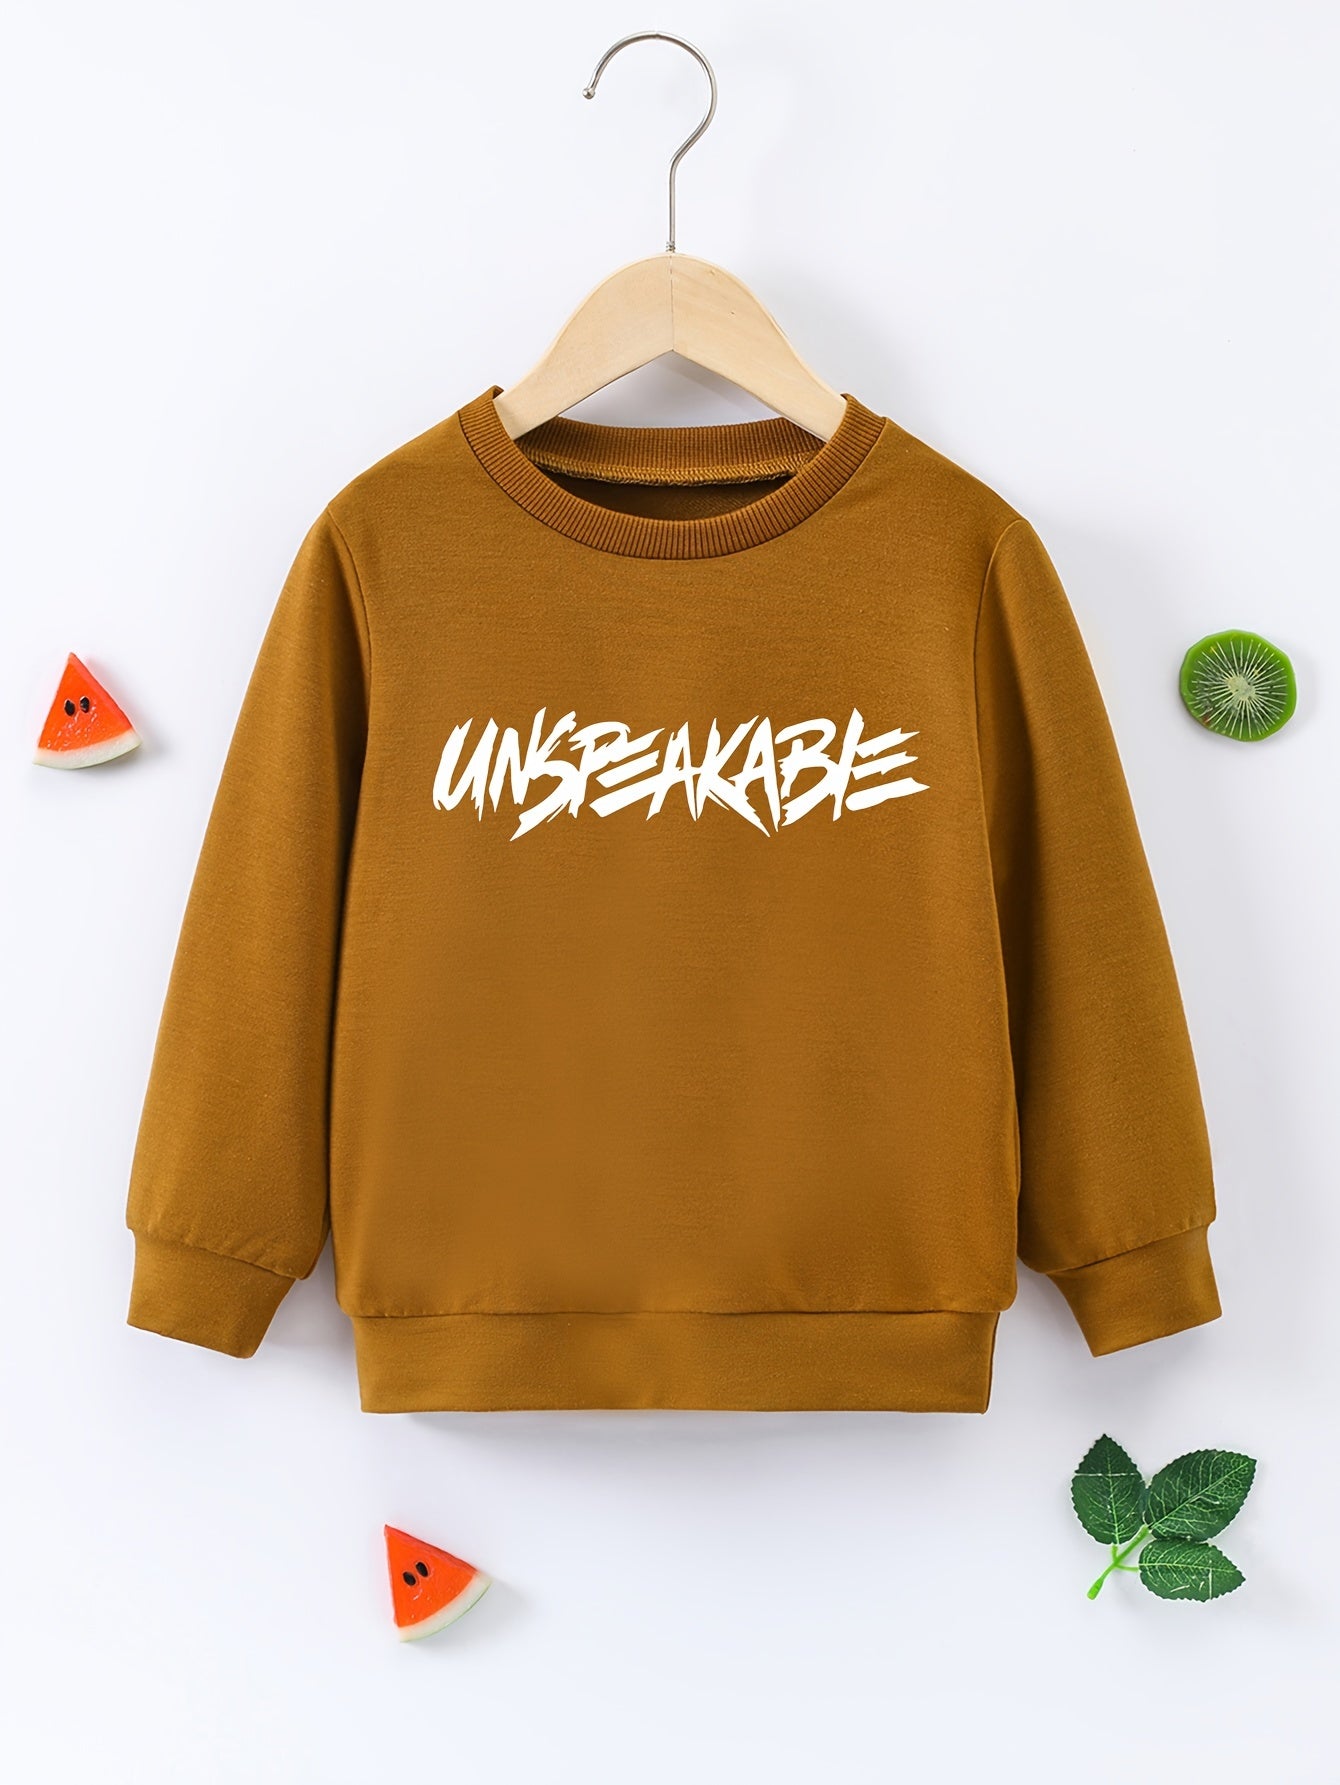 Trendy UNSPEAKABLE Letter Print Boys Casual Creative Pullover Sweatshirt, Long Sleeve Crew Neck Tops, Kids Clothing Outdoor